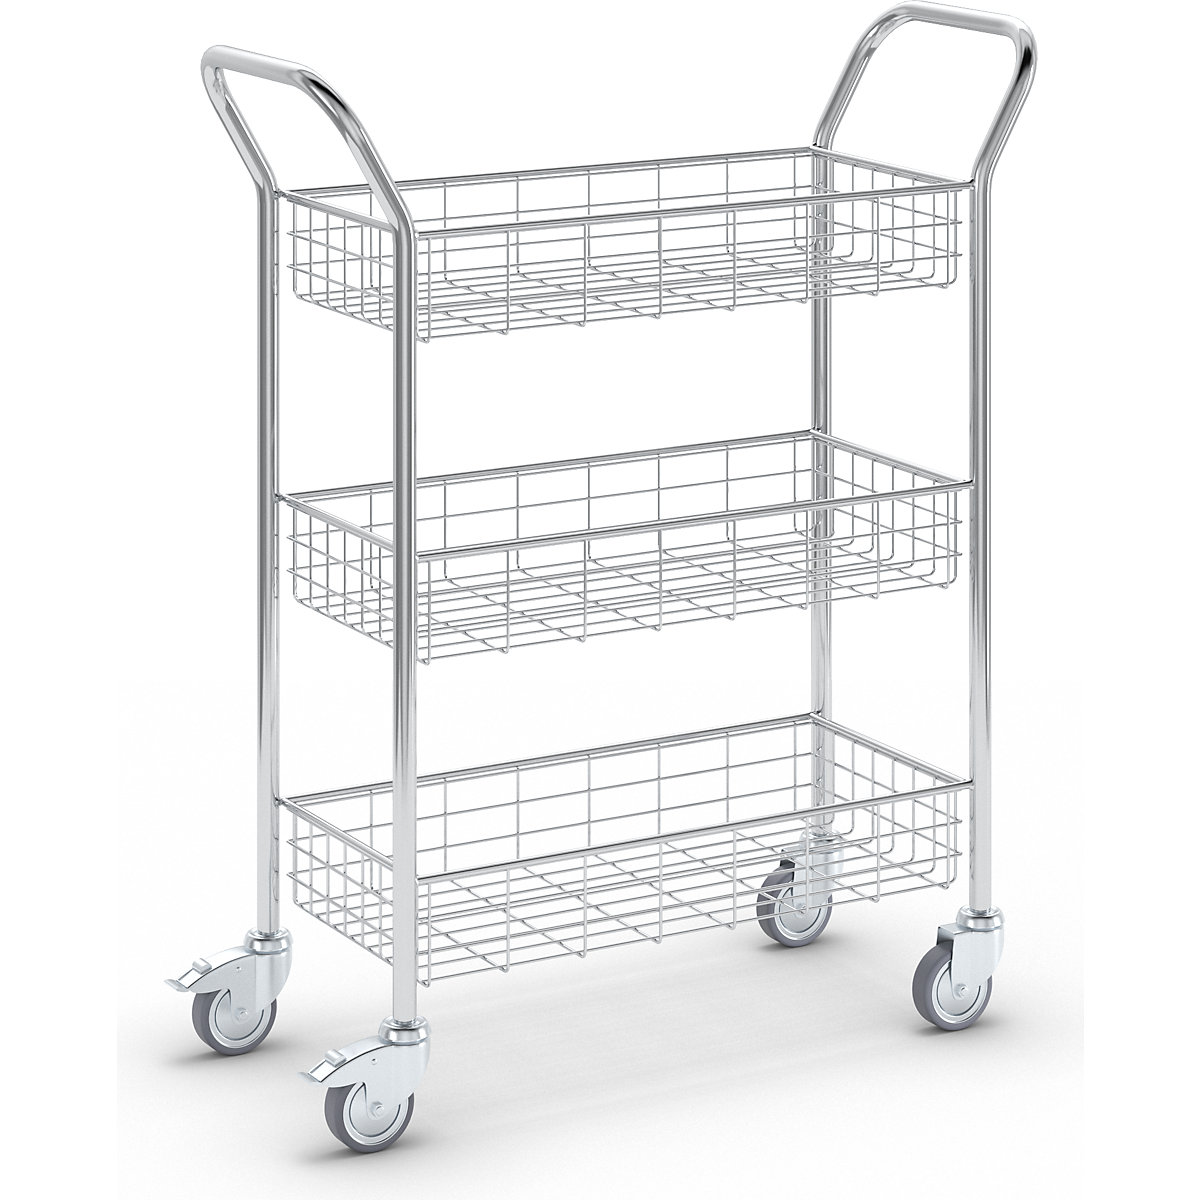 Office and mail distribution trolley – eurokraft pro, max. load 200 kg, white aluminium, LxWxH 1005 x 380 x 1245 mm, 3 shelves-12